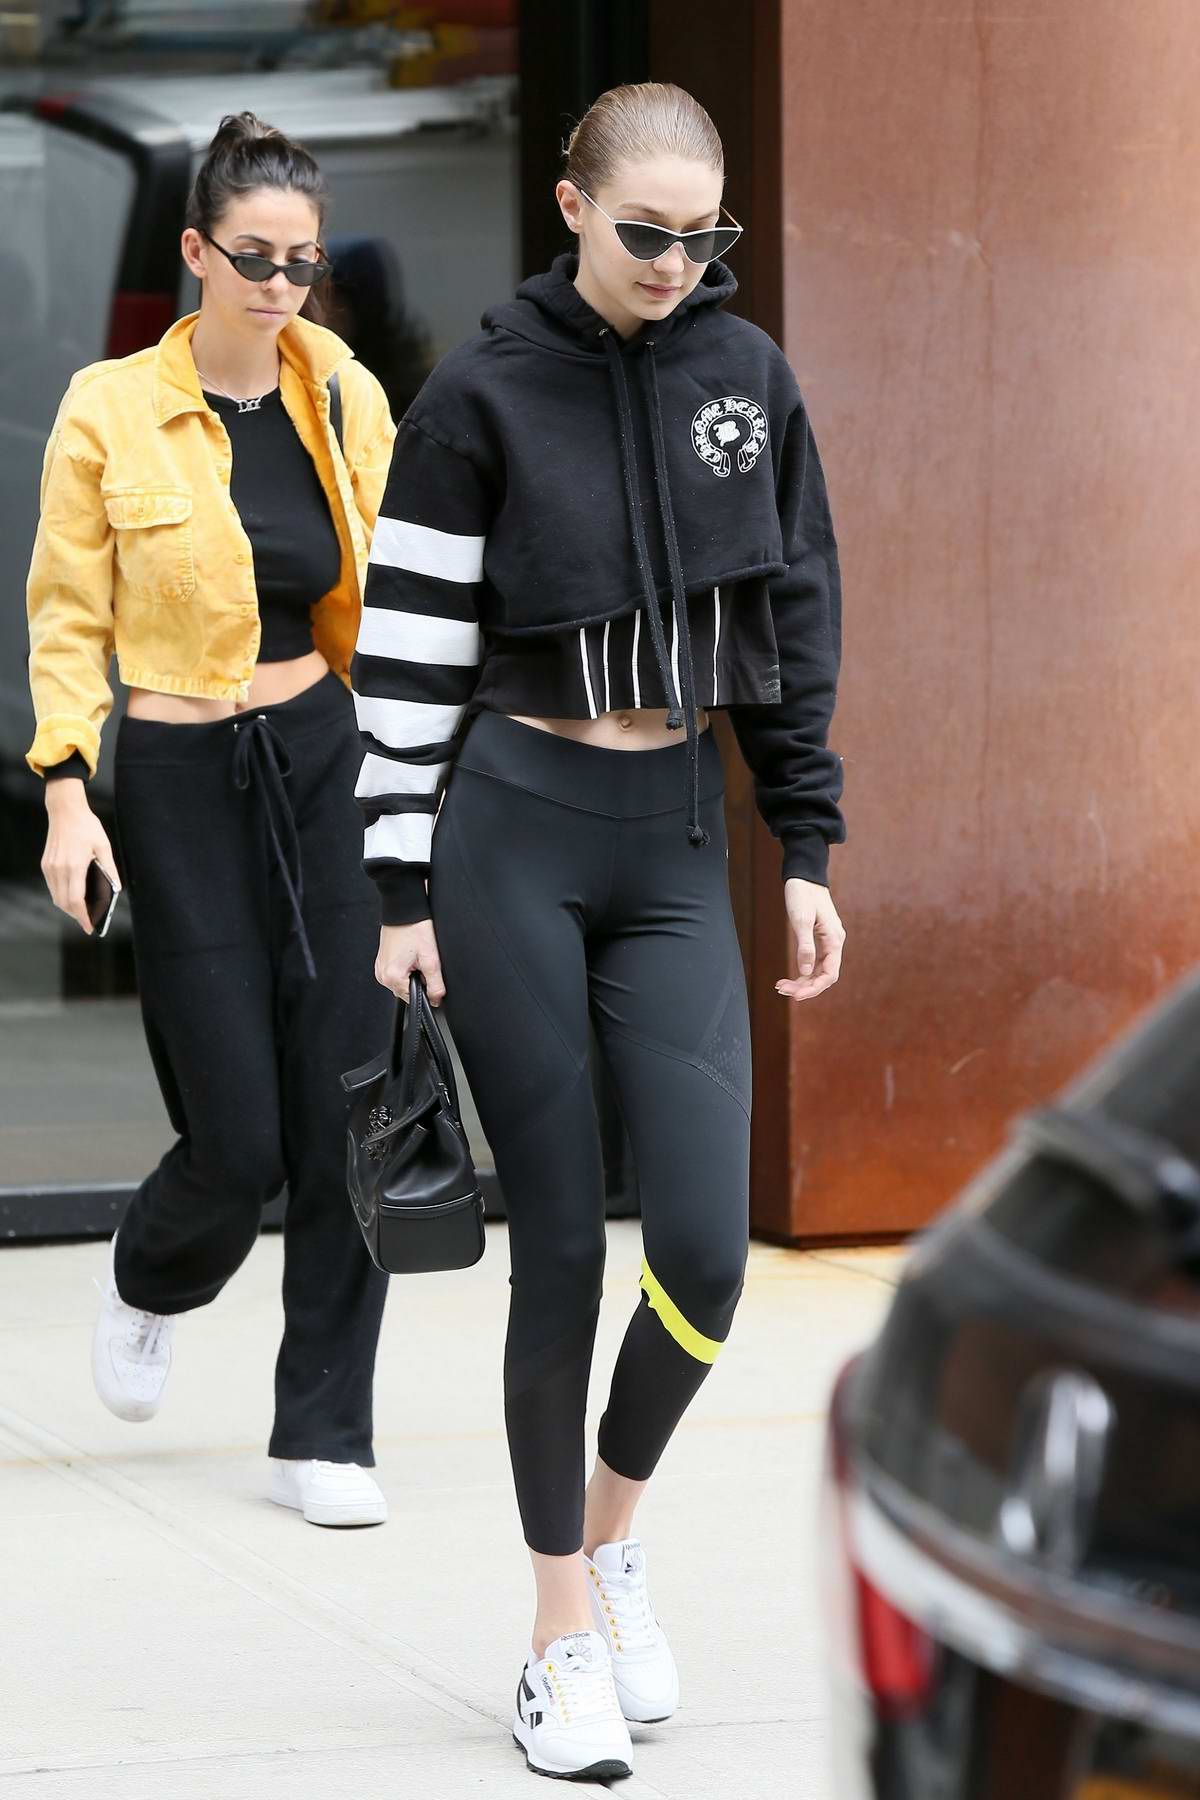 Gigi Hadid dons an all black outfit with a Versace bag as she heads out in